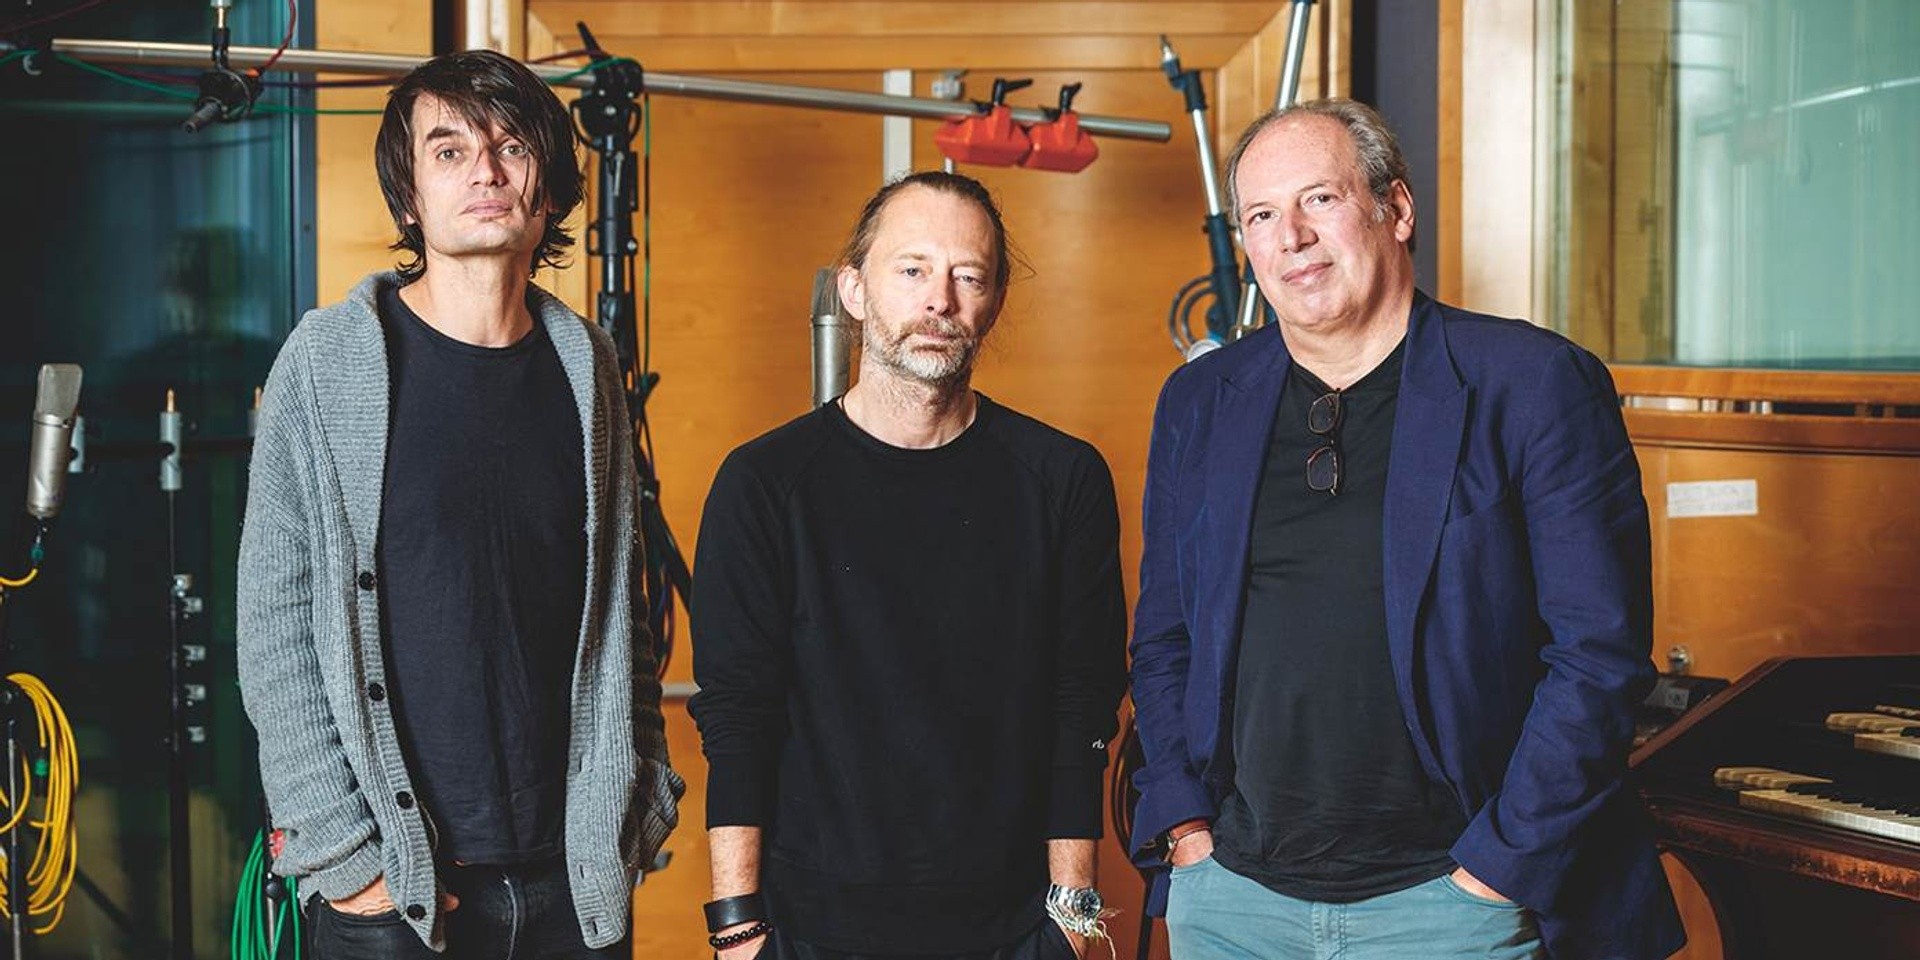 Hans Zimmer on Radiohead collaboration: It was "a little bit daunting for me"